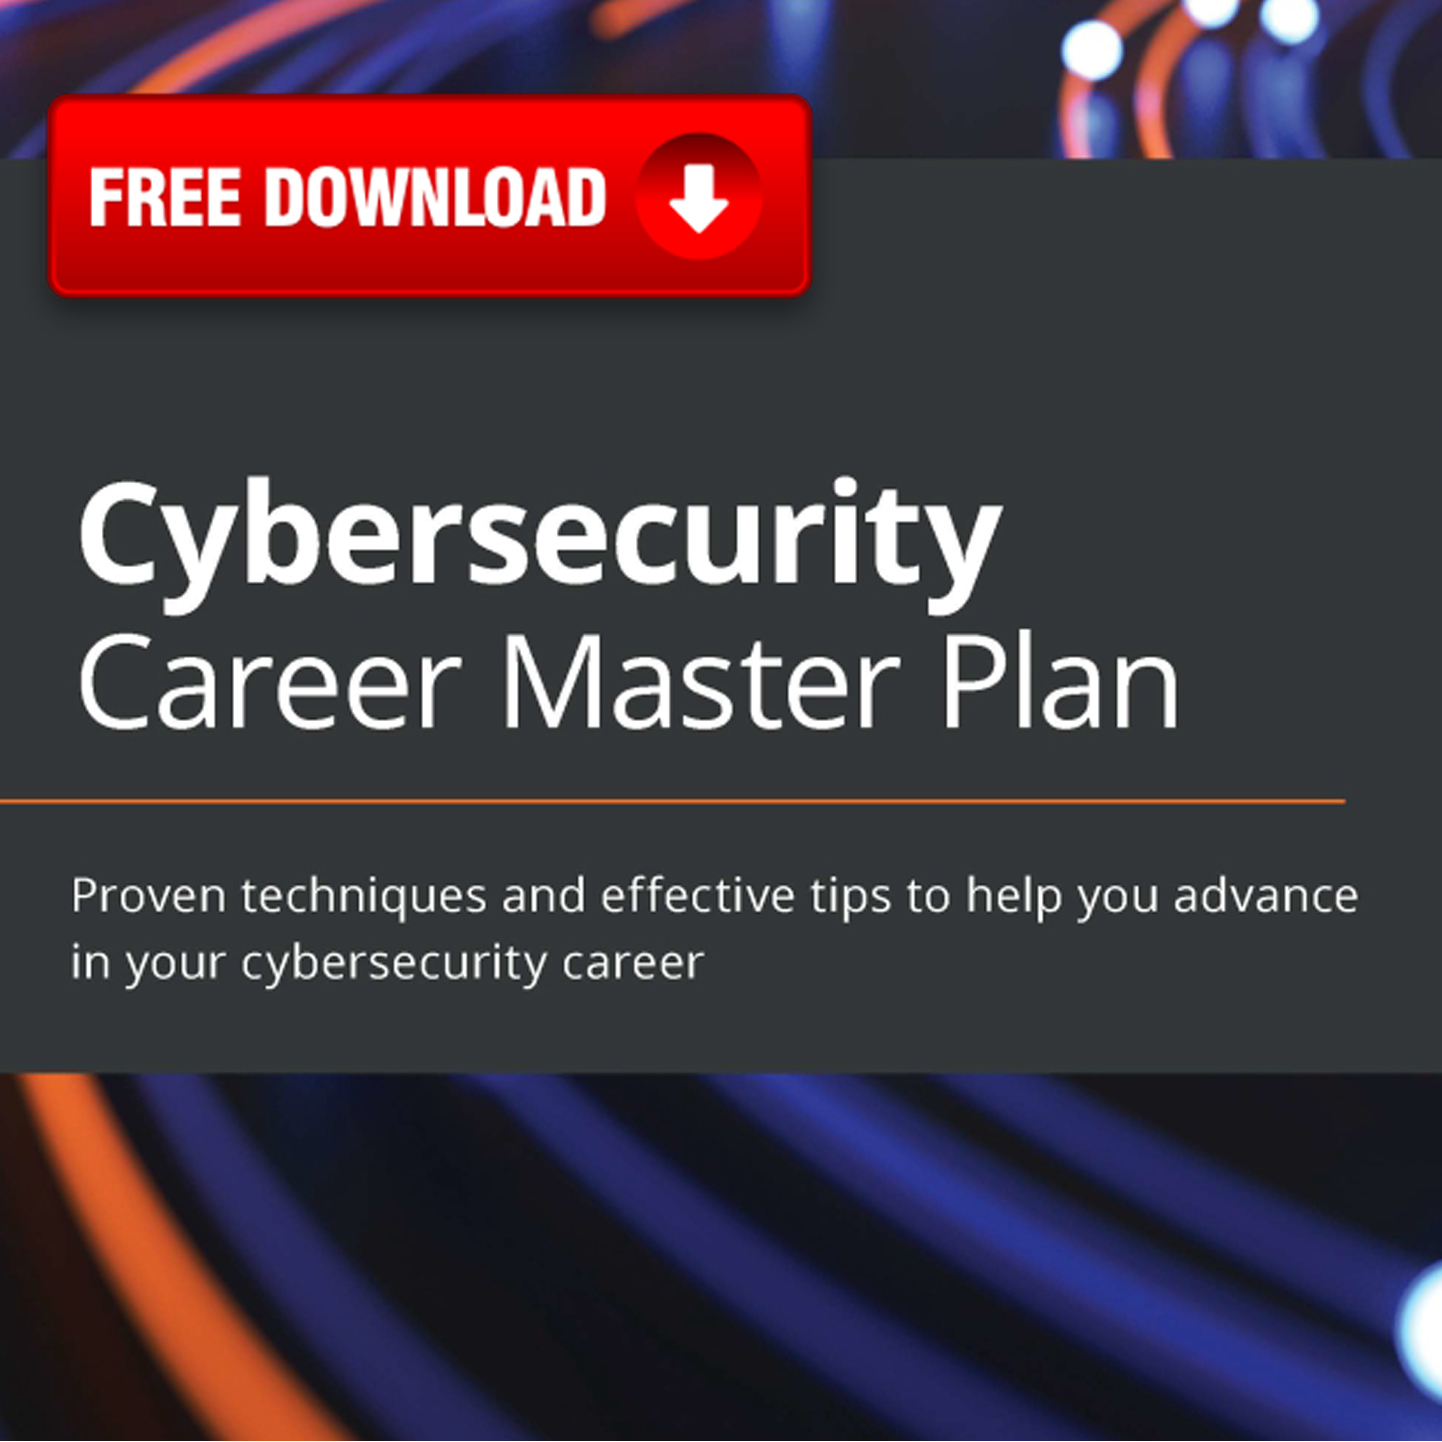 Cybersecurity Career Master Plan Proven techniques and effective tips Guide